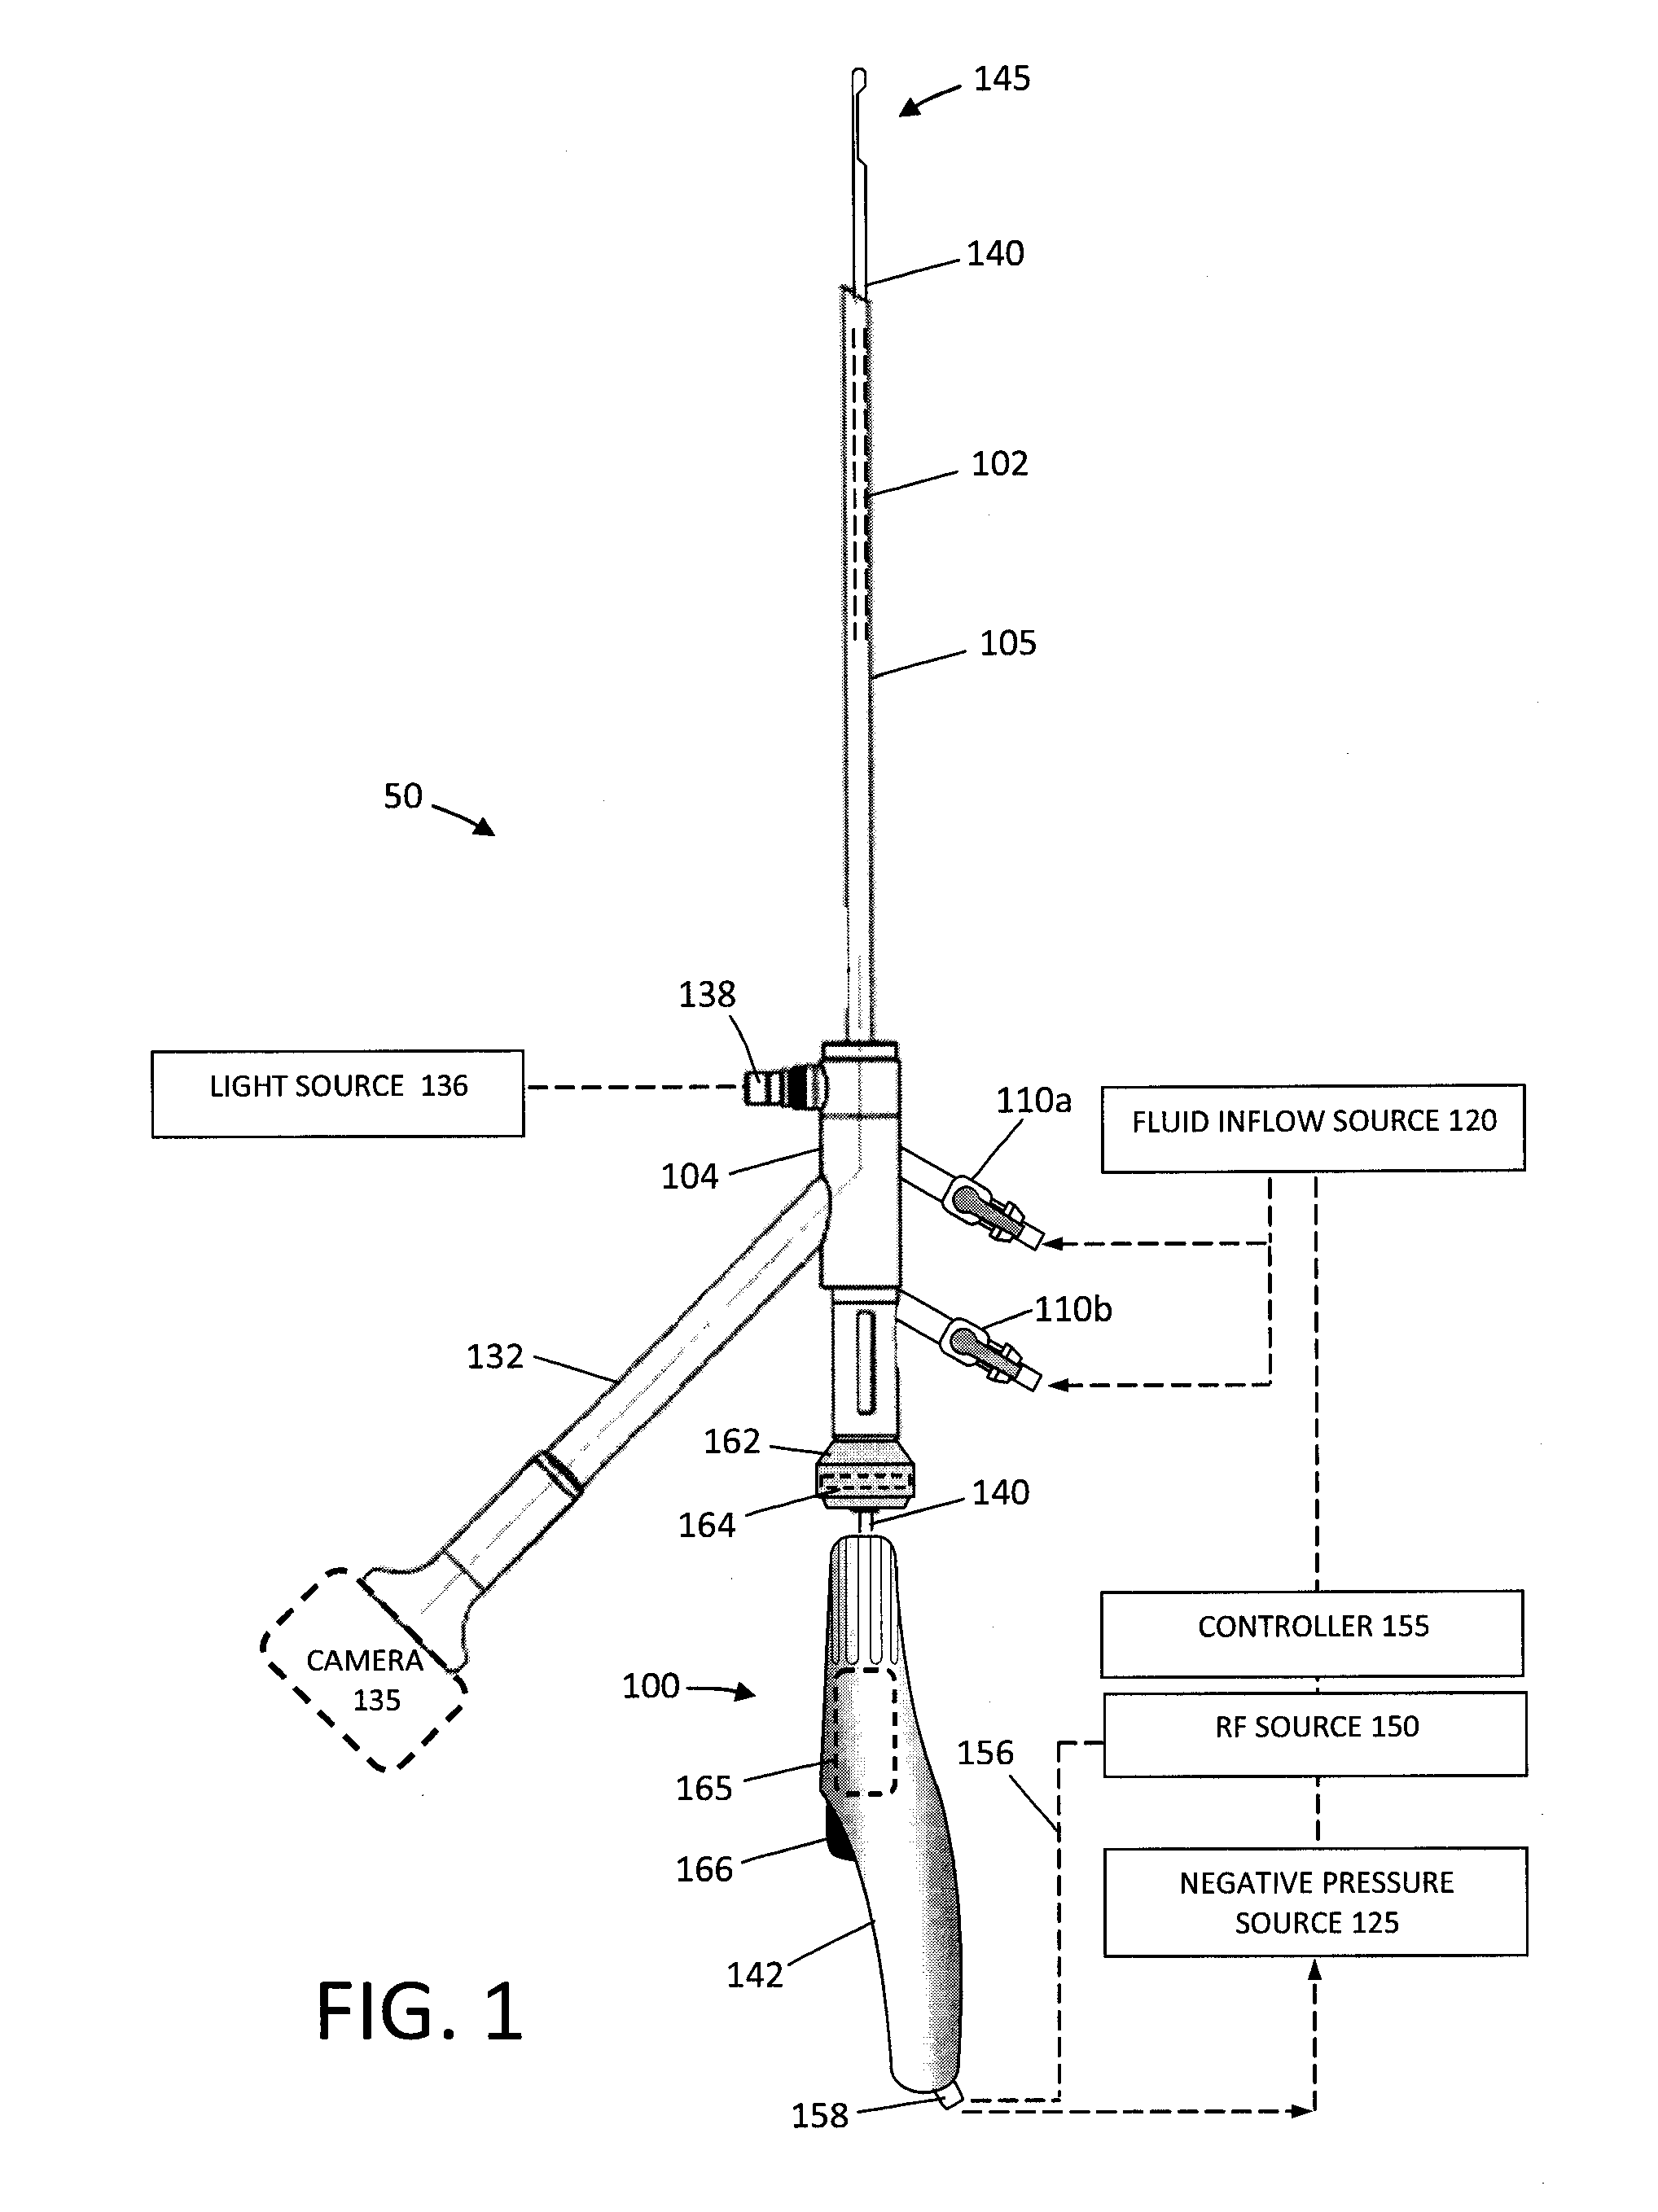 Surgical fluid management systems and methods